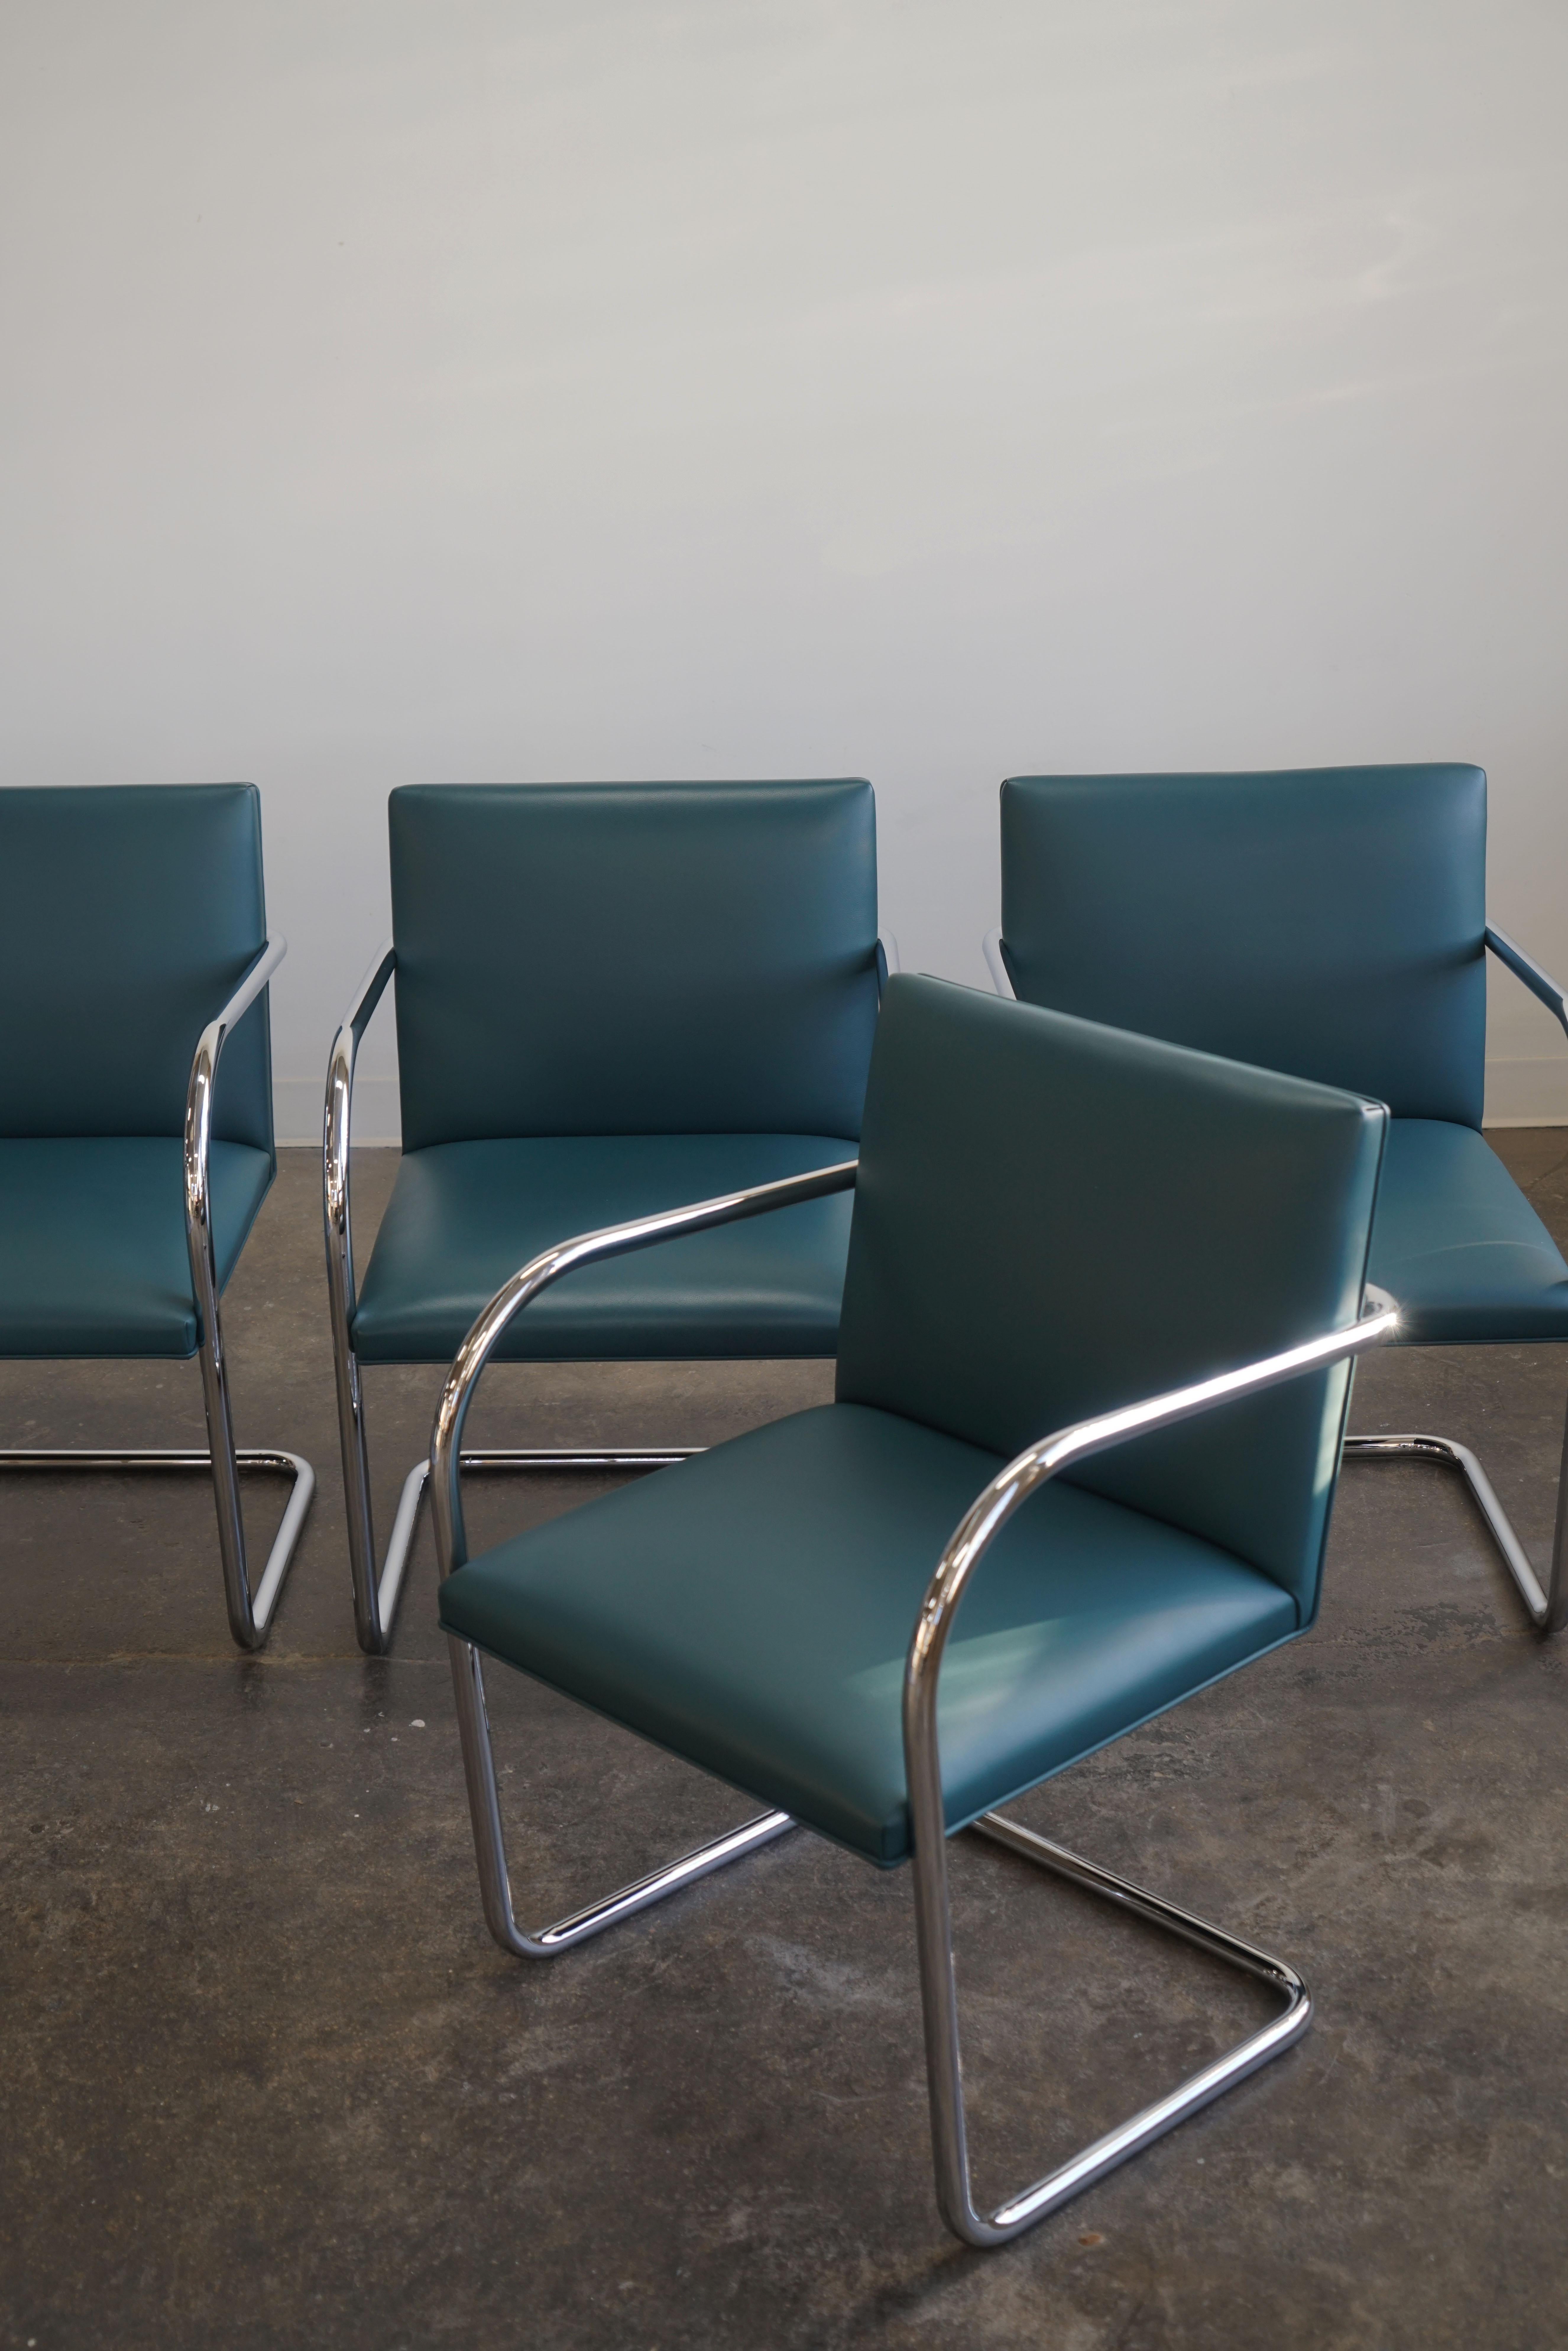 Set of Four Mies van der Rohe for Knoll BRNO tubular chairs
In teal leather.

The elegant Brno Tubular Chair (designed in 1930) has a chromed tubular steel frame that fluidly bends into a curving single-piece form. This is one  the first